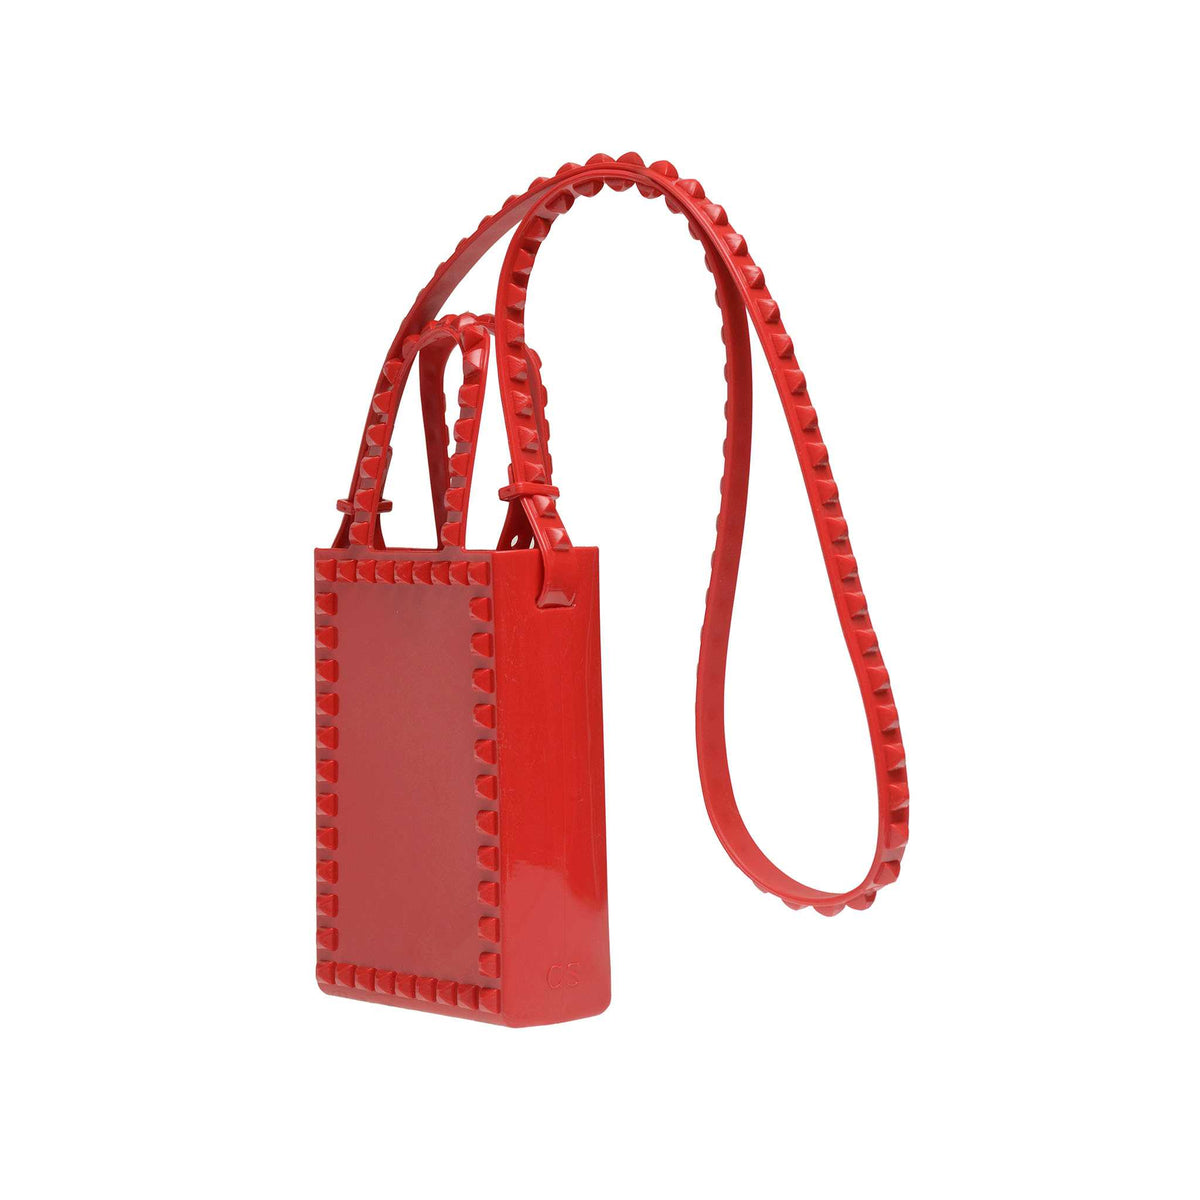 Buy Alice Crossbody bags, the tote bags, beach purse for women